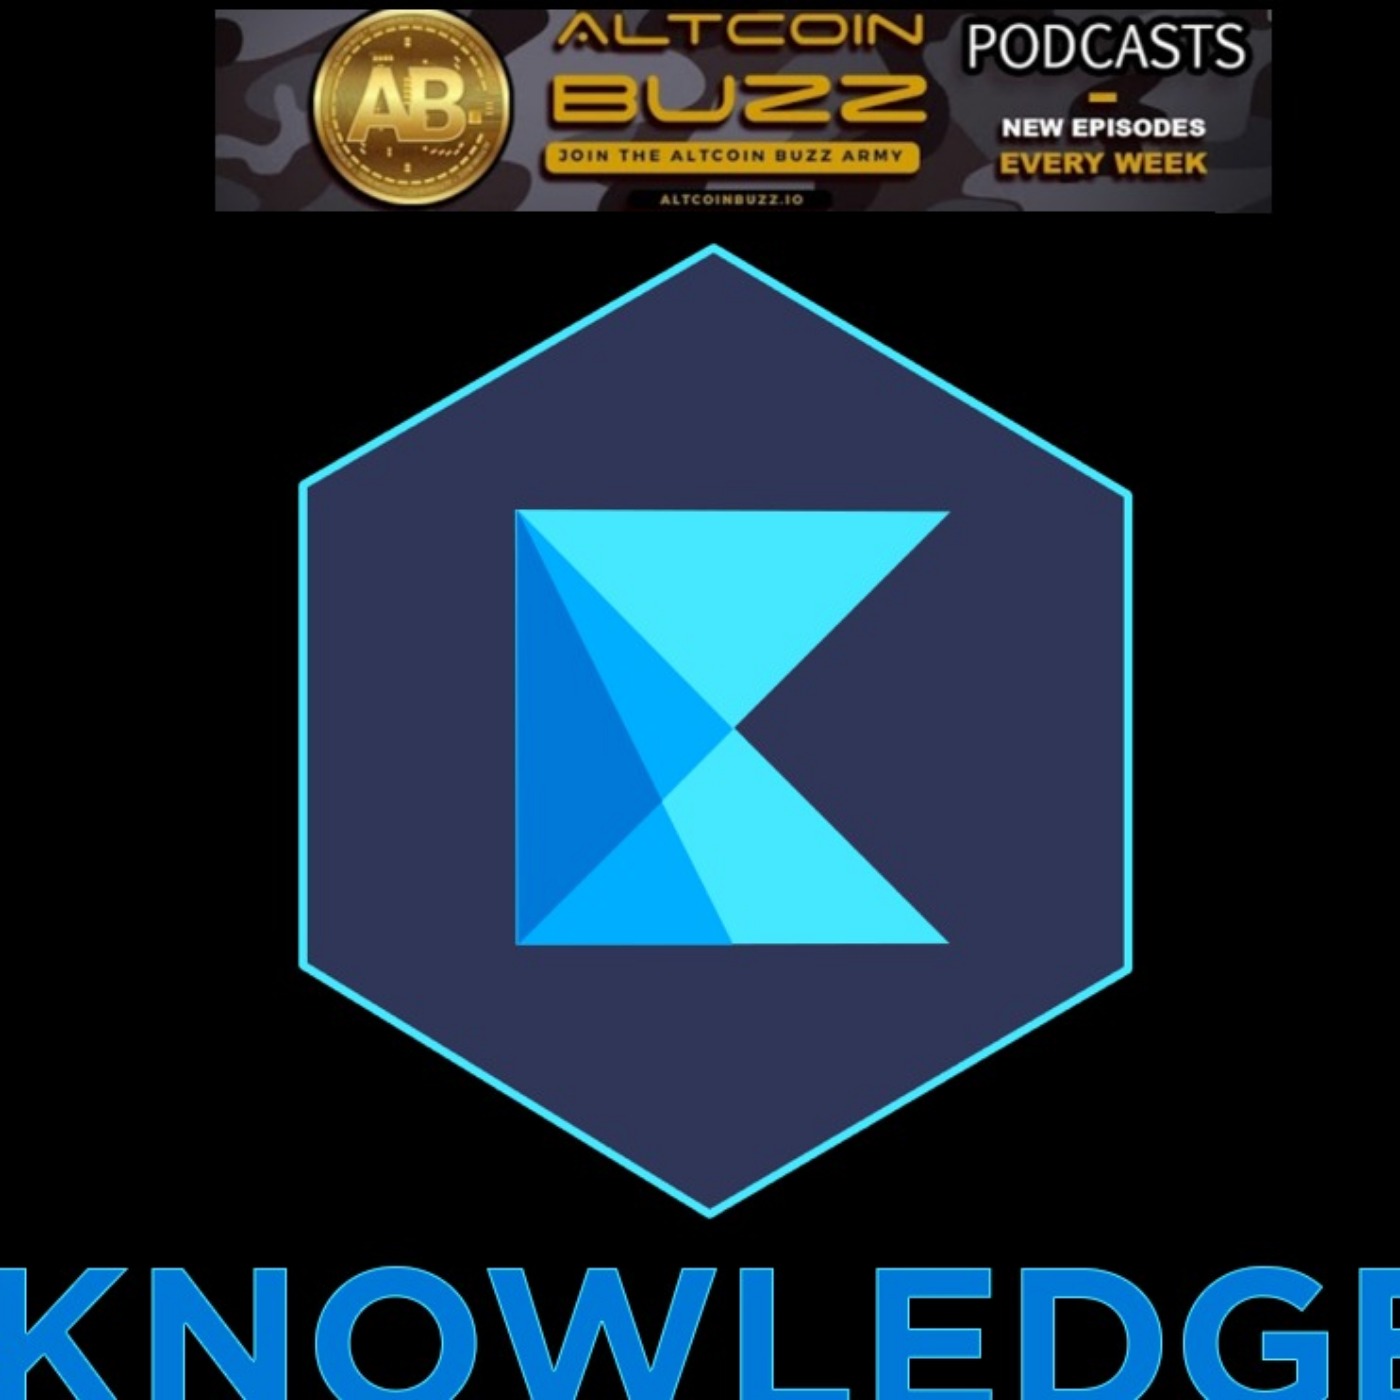 Interview with Knowledge.io, Get Paid to Play Games - EP. 17